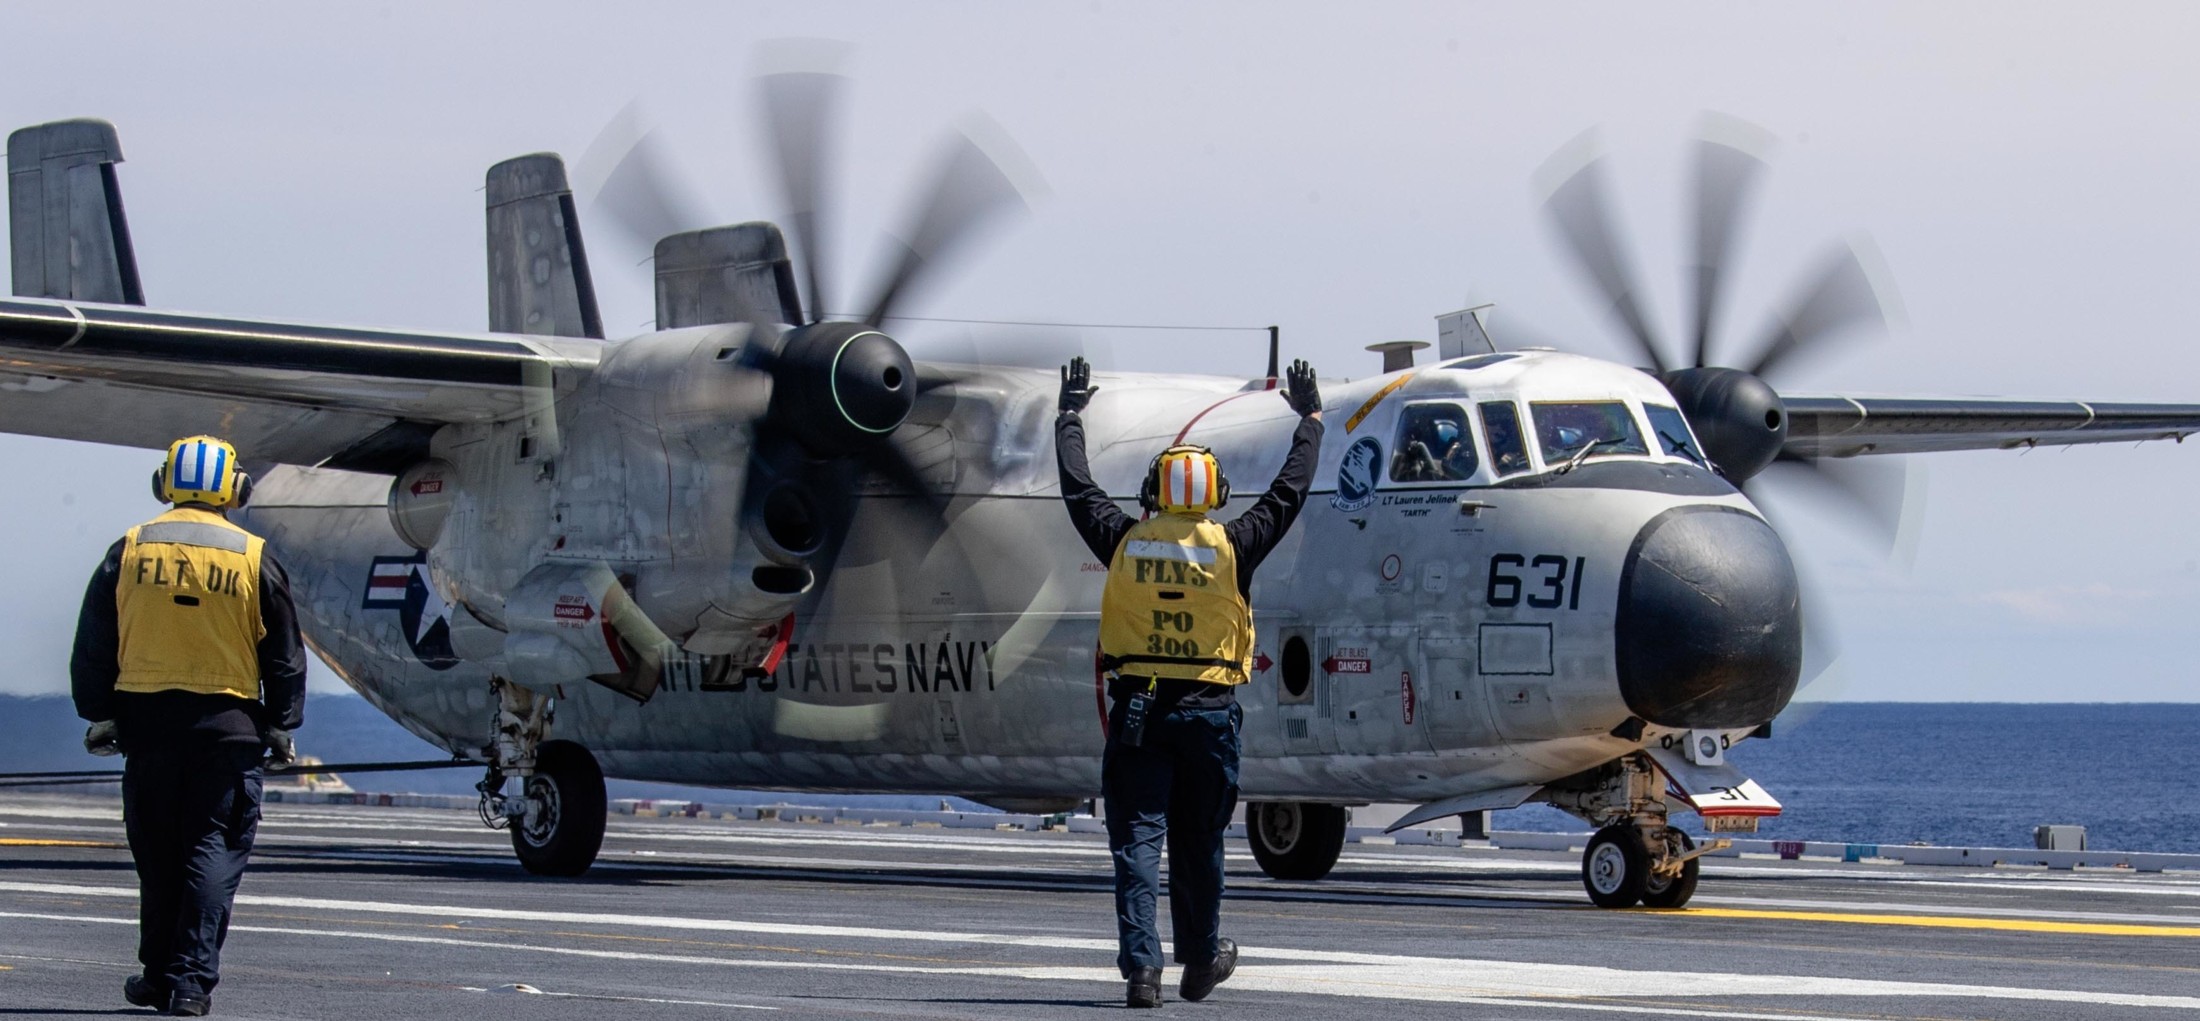 vaw-120 greyhawks airborne command control squadron c-2a greyhound replacement uss gerald r. ford cvn-78 35